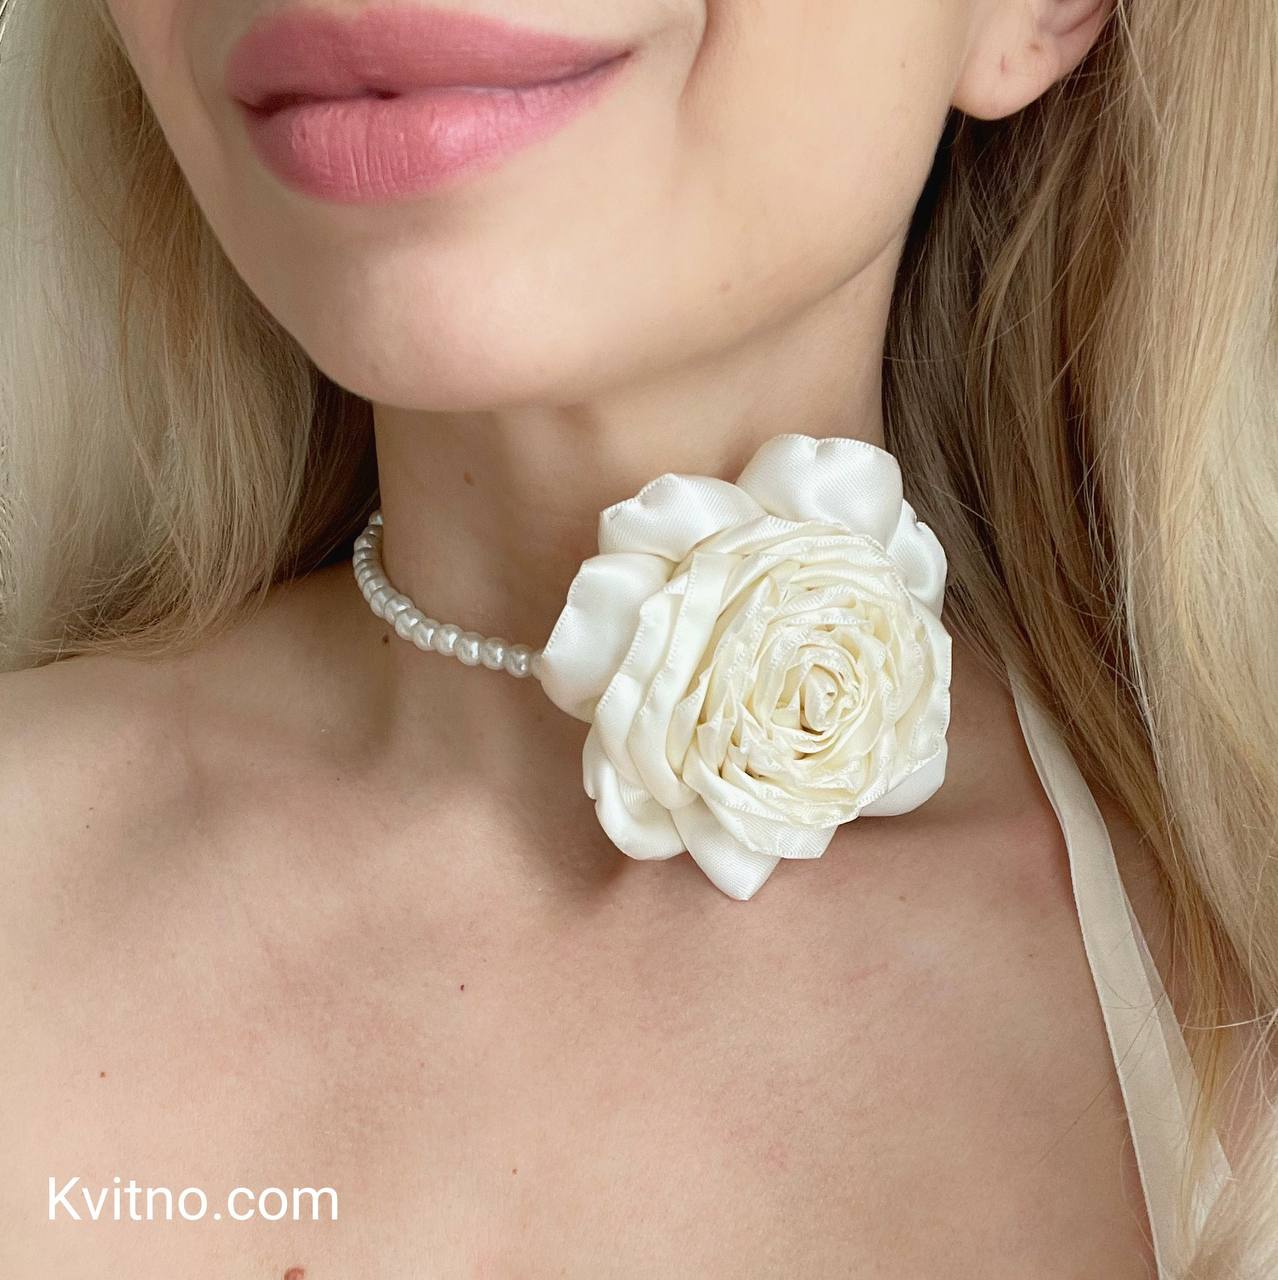 Ivory Elegant Faux Pearl Flower Choker Necklace - Realistic Rose - The Perfect Bridal Accessory for Weddings and Formal Events